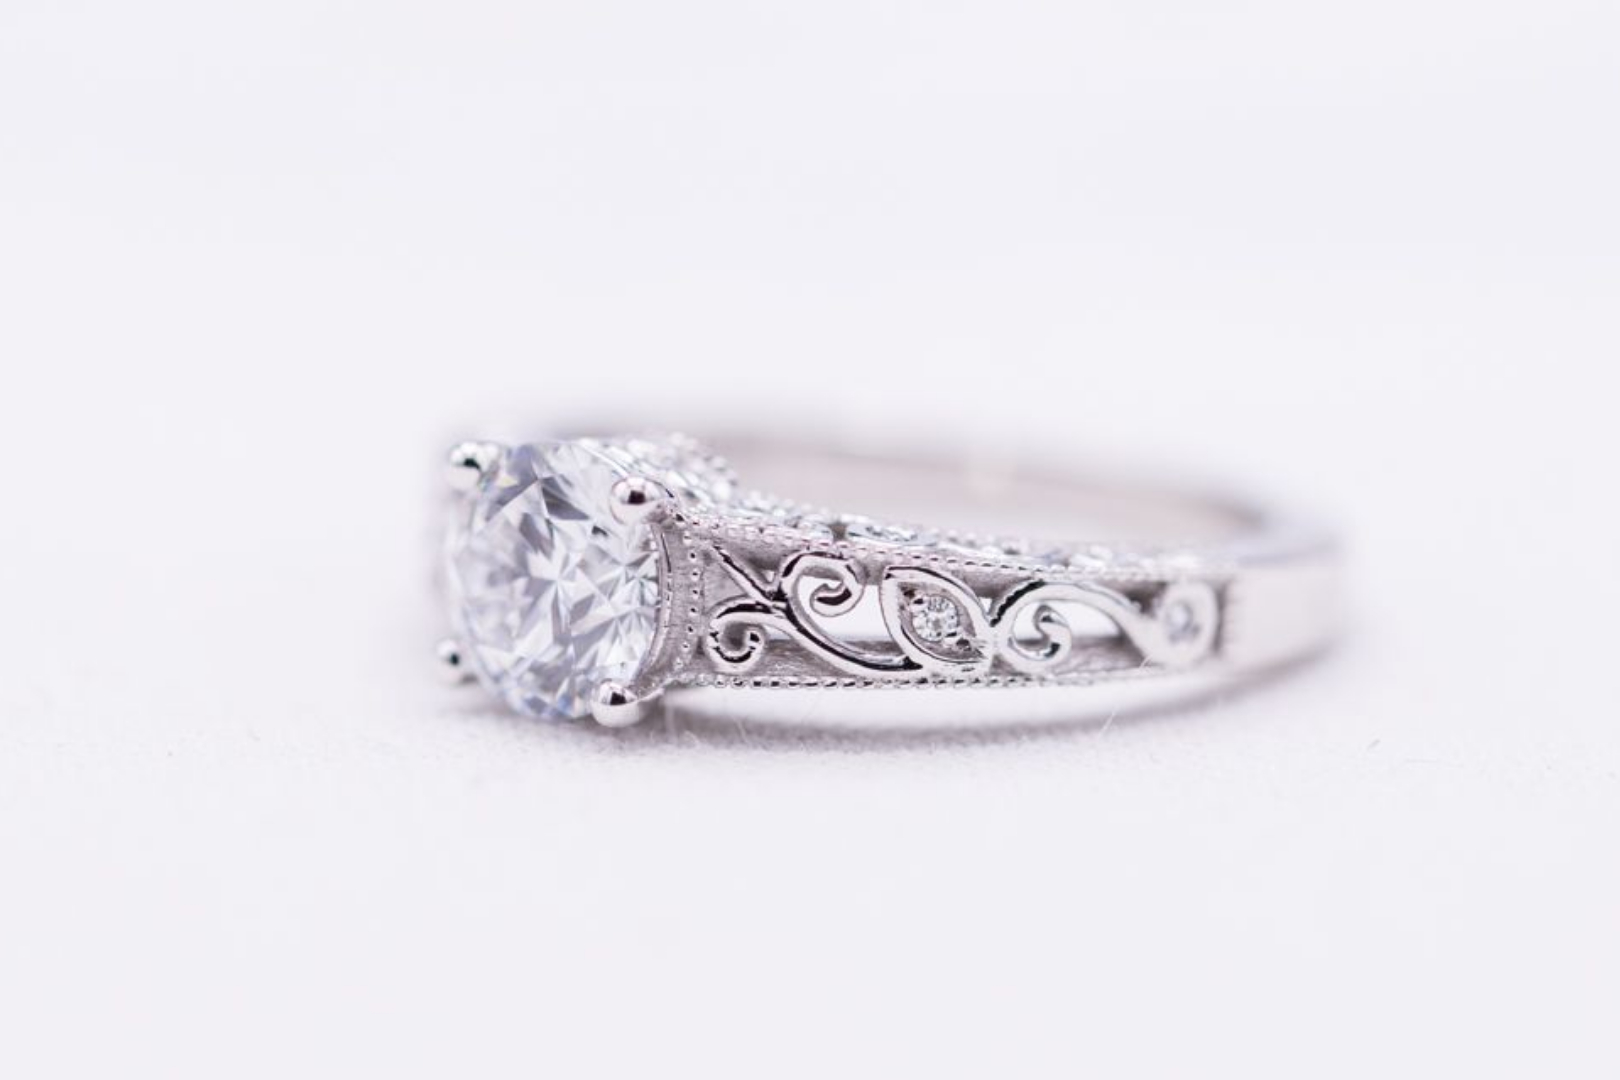 Round lab-created diamond in white gold with filigree